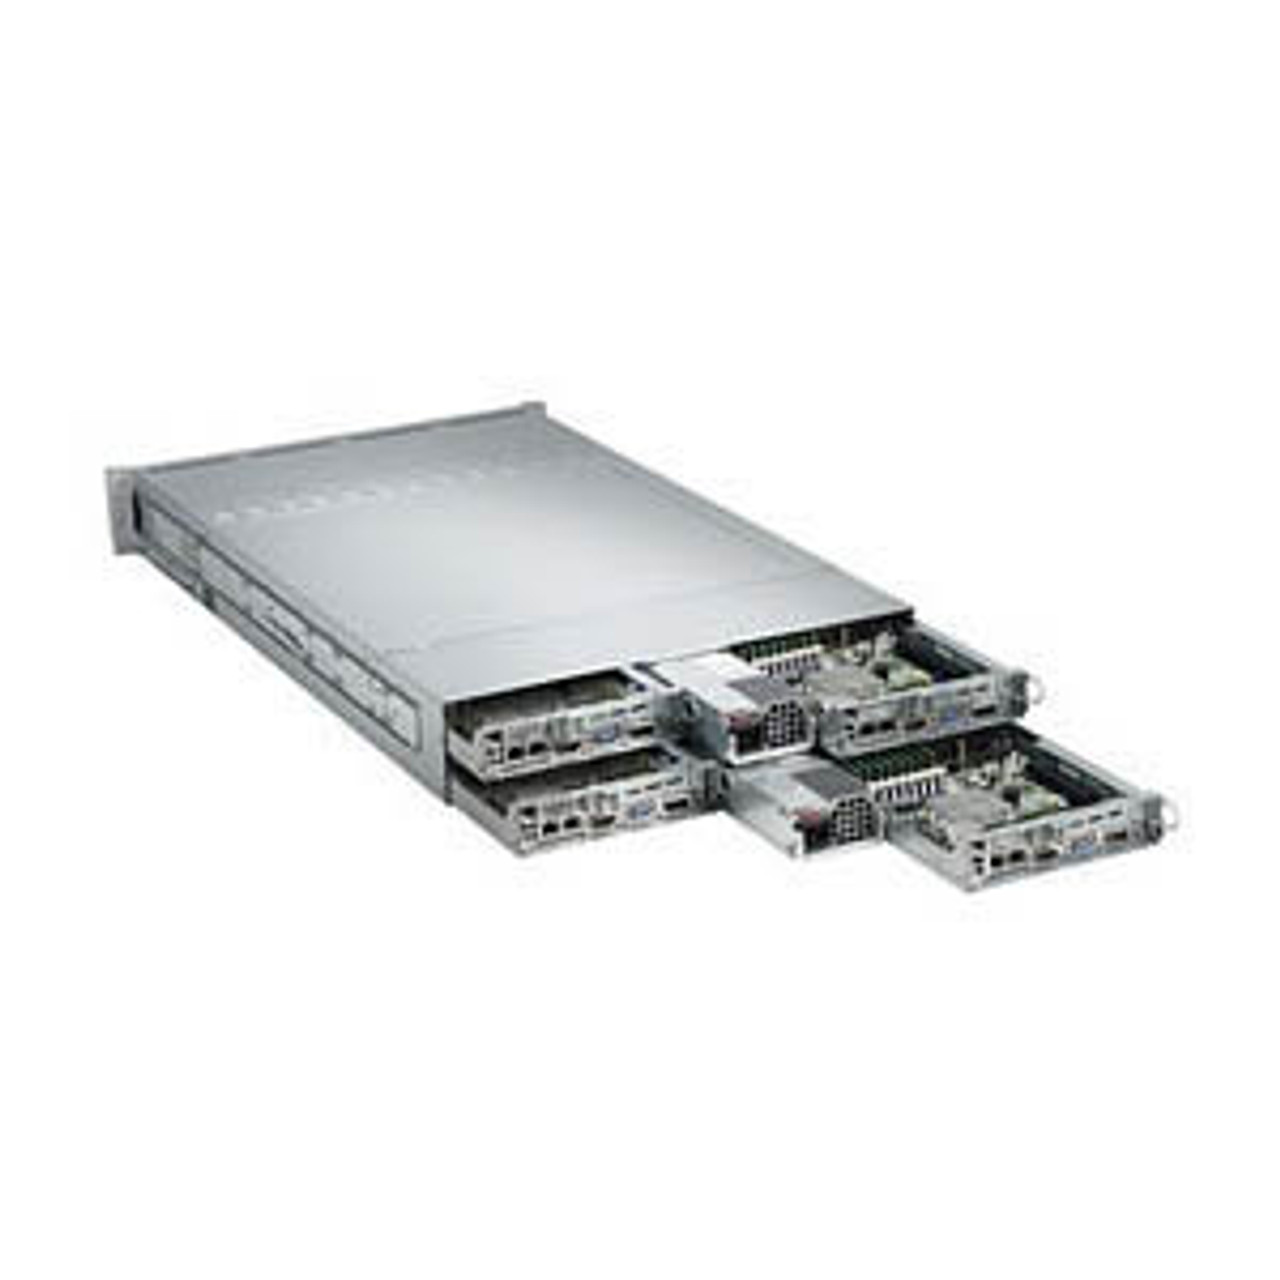 Supermicro AS-2022TG-HTRF